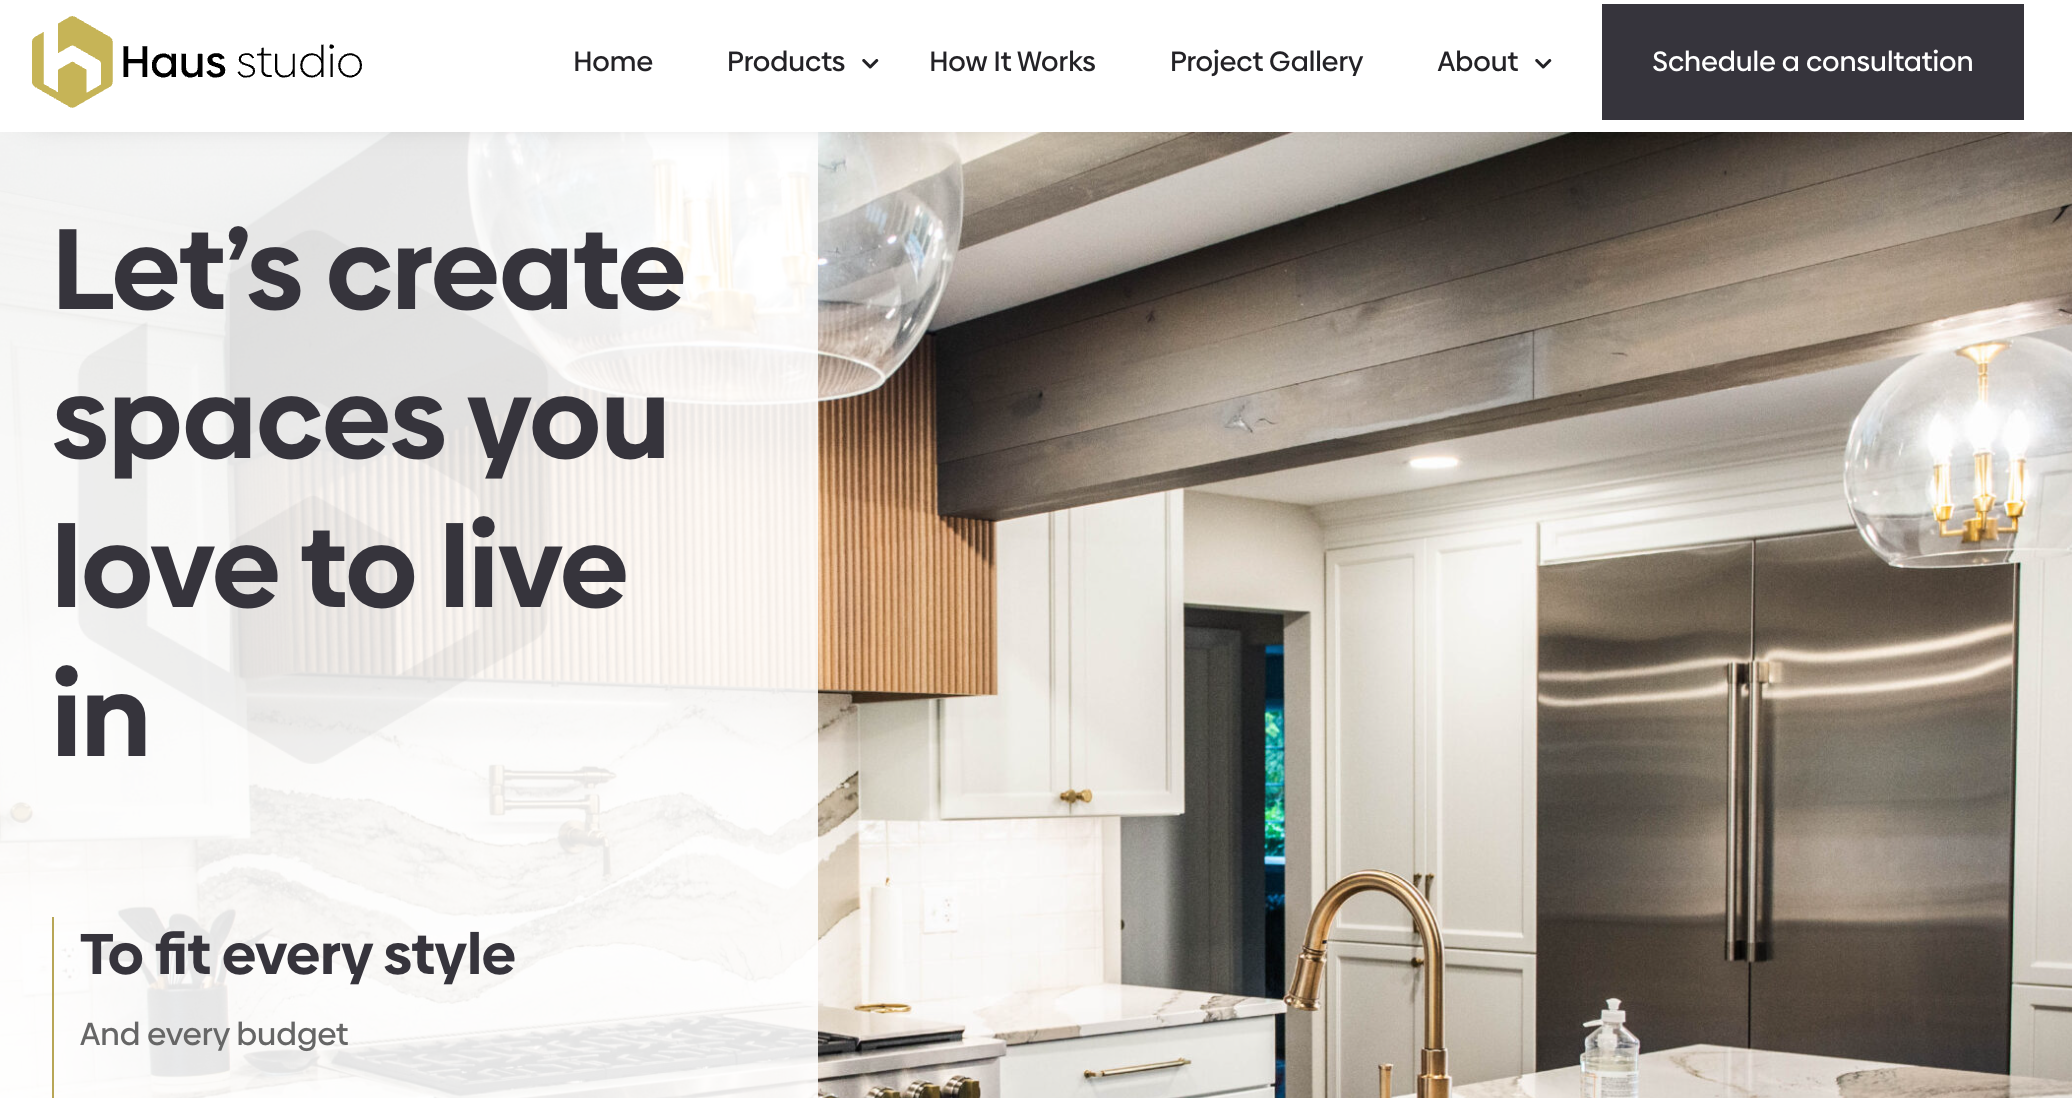 The homepage of a new website for a kitchen and bath designer.